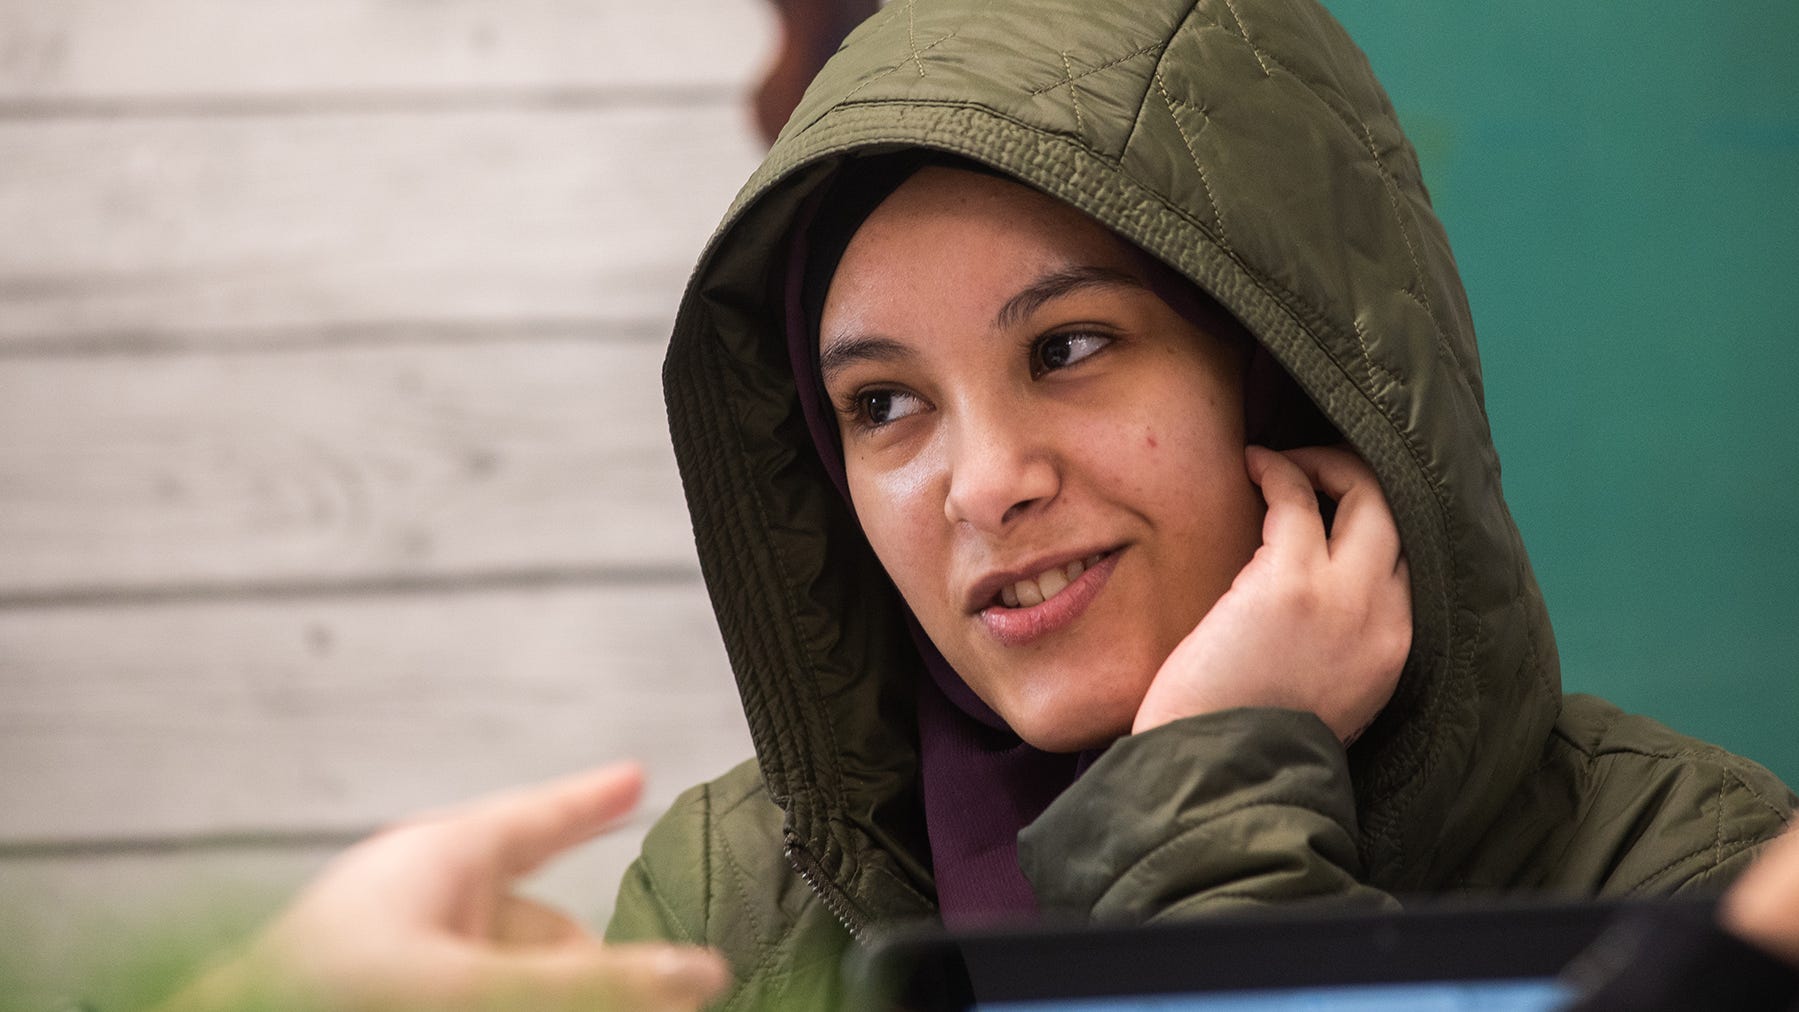 Hanan Ali, 16, listens through an earpiece that is translating what her teacher is saying from English to Arabic in real time during her class recently at South Middle School in Newburgh.